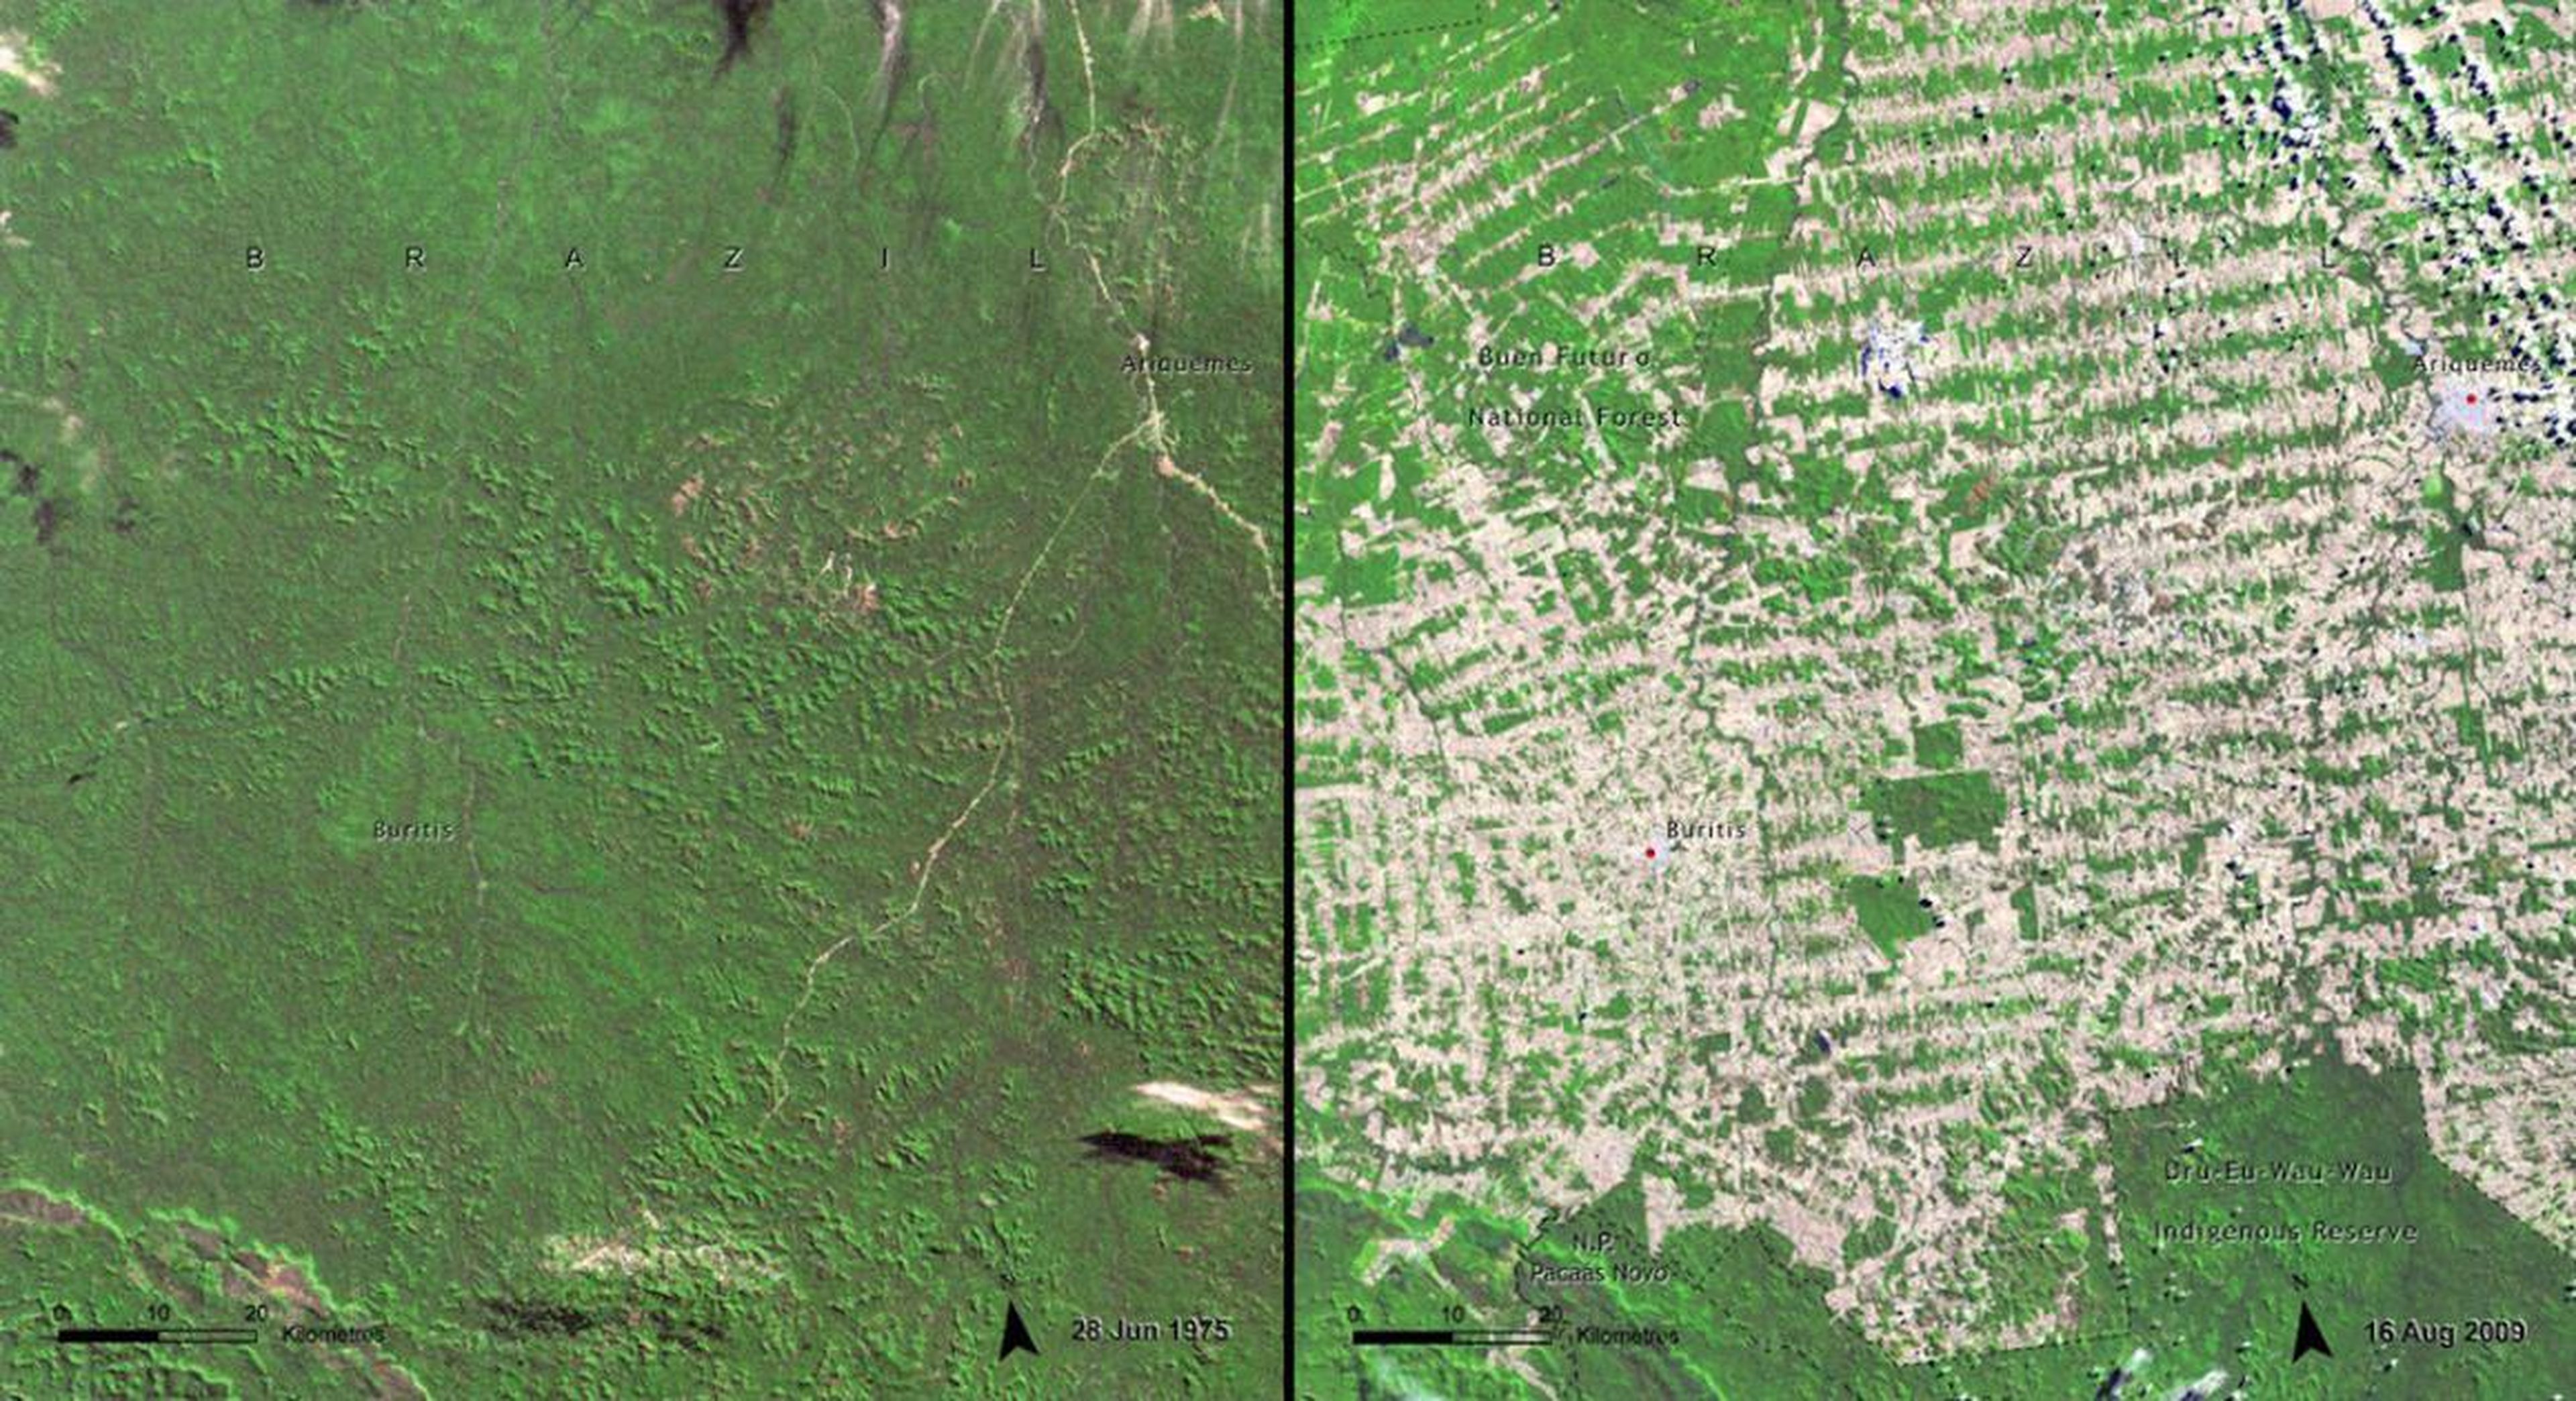 This area of Rondonia, Brazil was heavily deforested between 1975 (left) and 2009 (right).